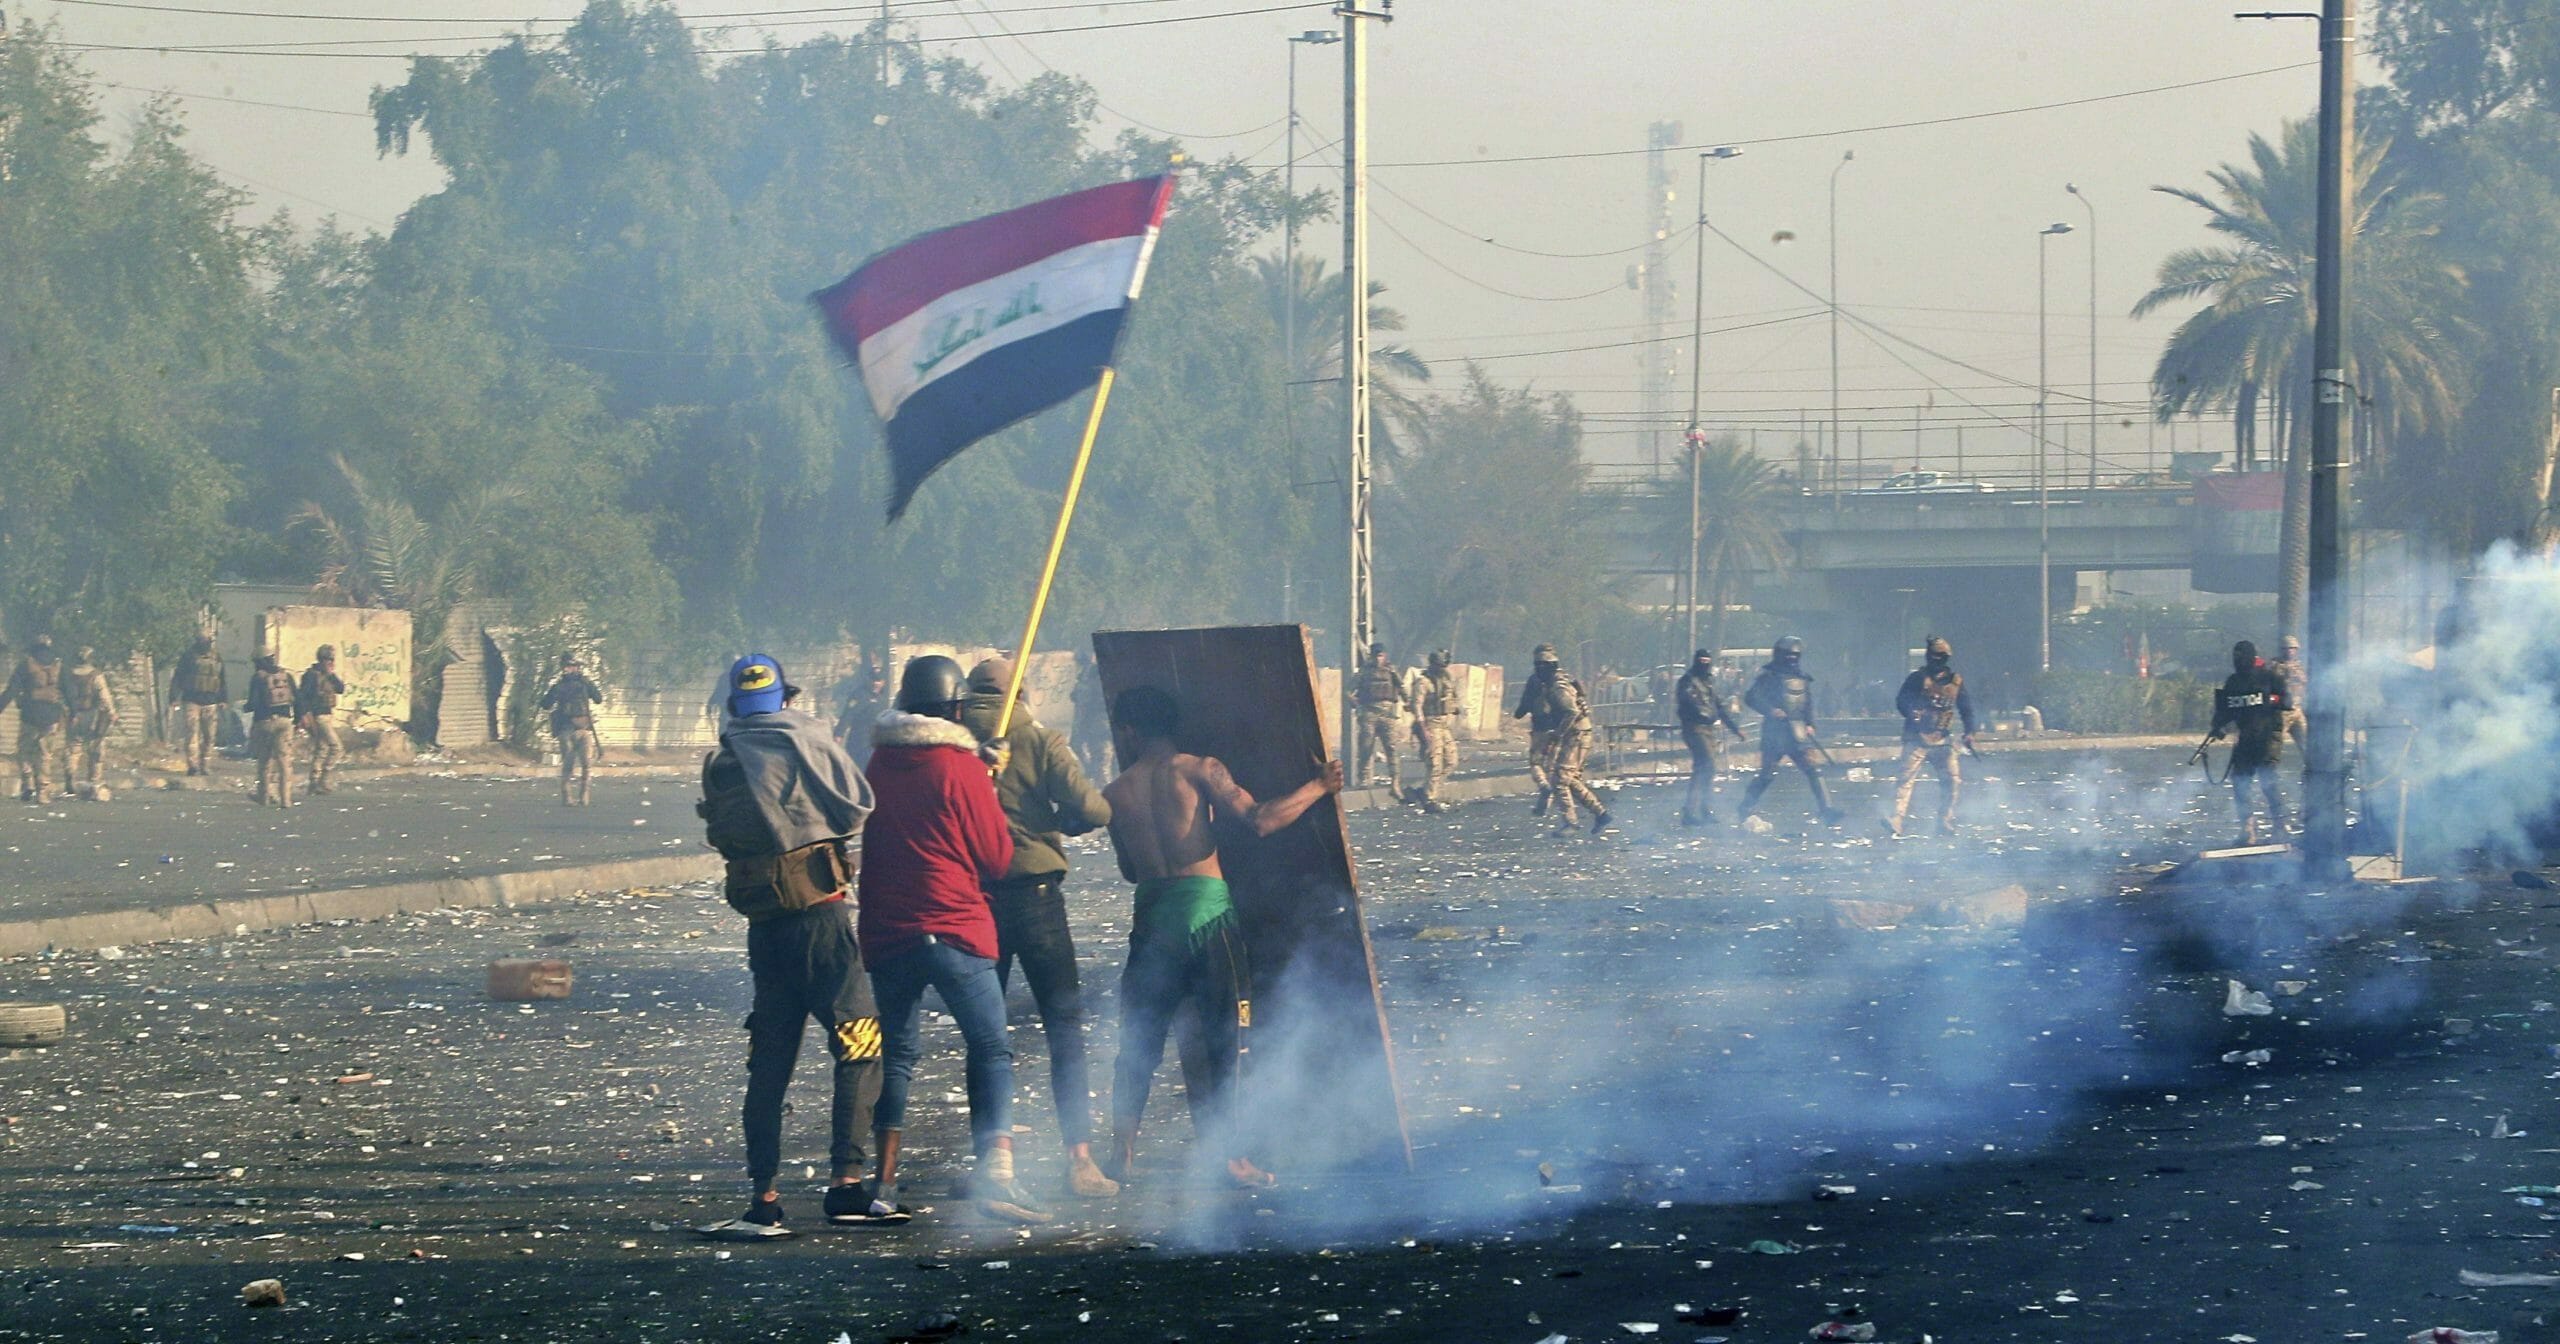 Protesters wave the Iraqi national flag as security forces fire tear gas during an ongoing protest in central Baghdad on Jan. 20, 2020.